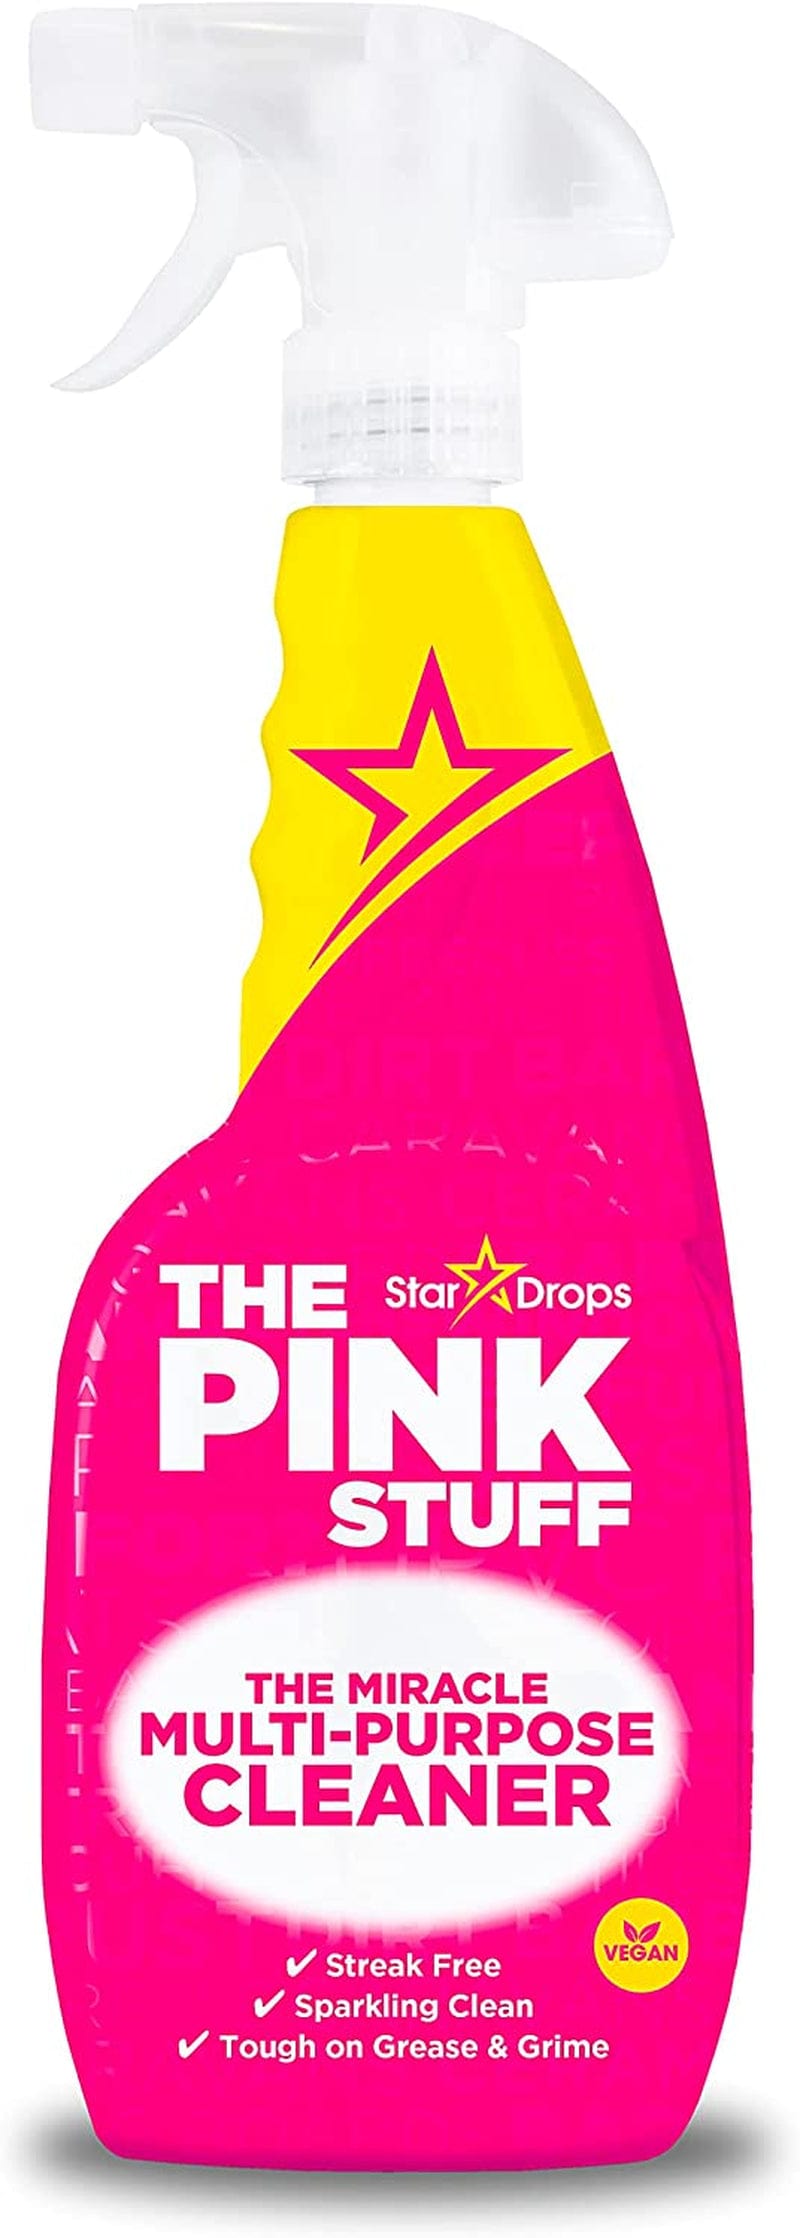 Stardrops - the Pink Stuff - the Miracle Cleaning Paste, Multi-Purpose Spray, and Bathroom Foam 3-Pack Bundle (1 Cleaning Paste, 1 Multi-Purpose Spray, 1 Bathroom Foam) Home & Garden > Household Supplies > Household Cleaning Supplies Stardrops   